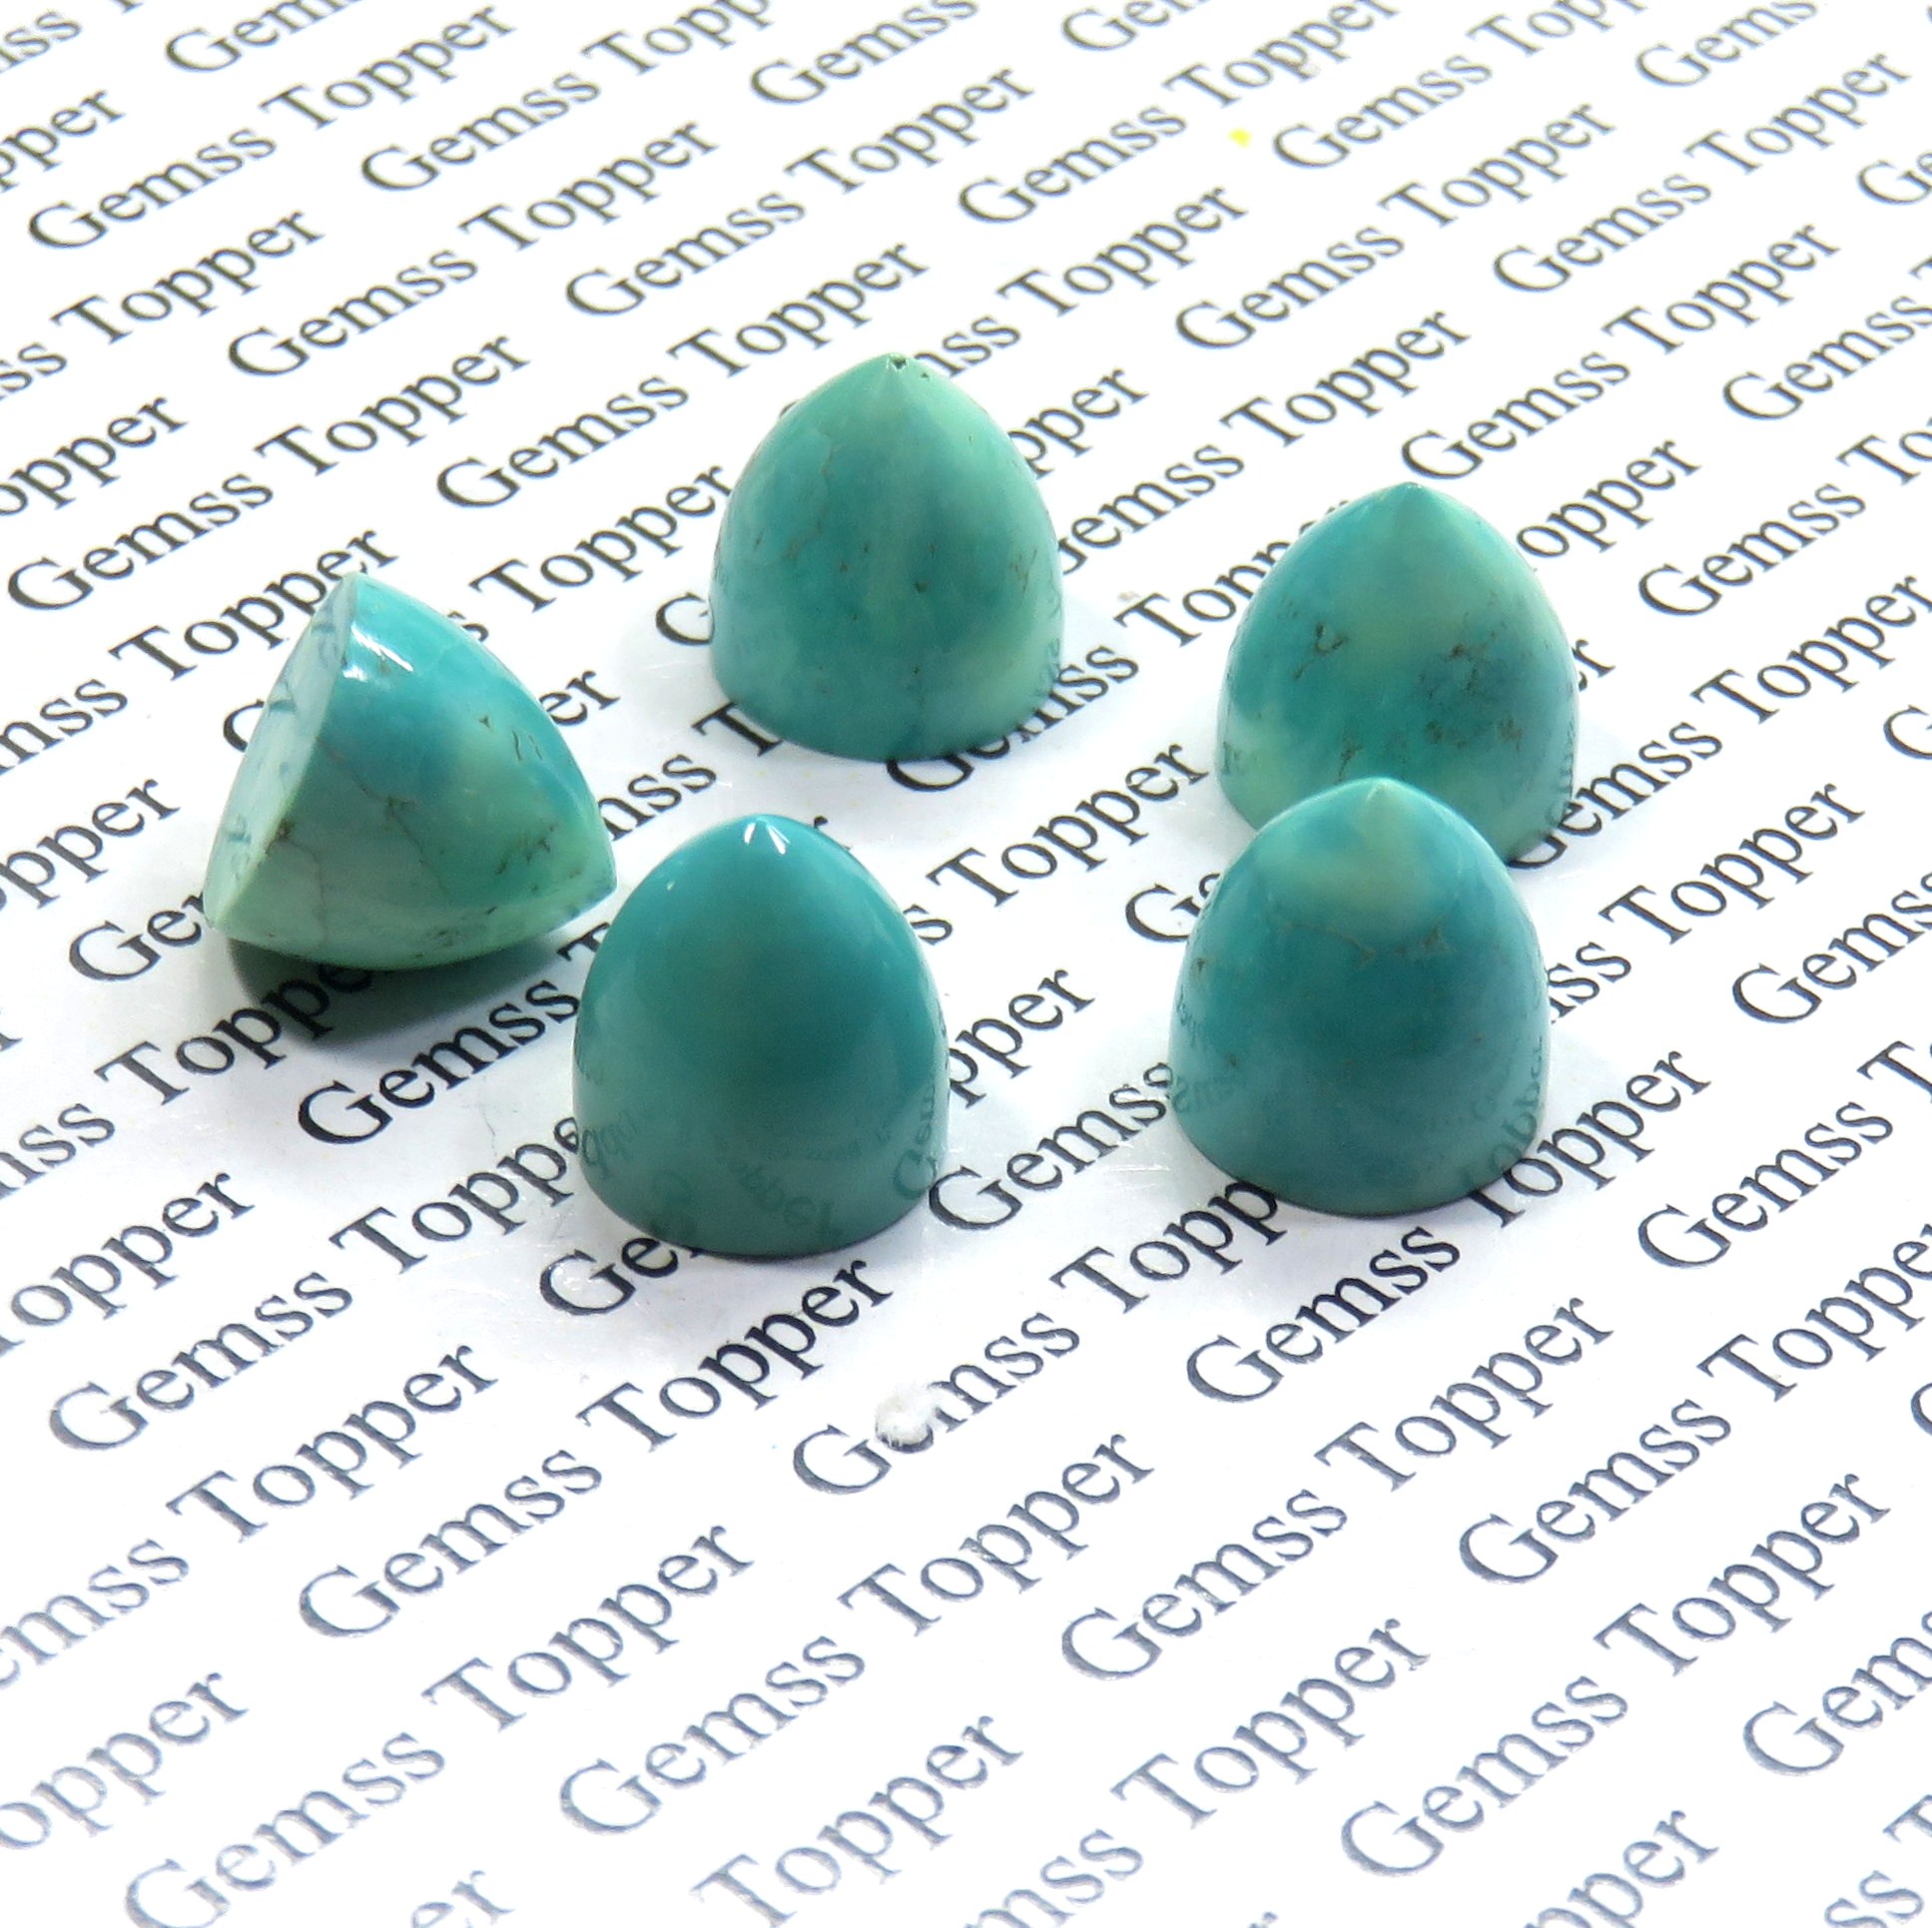 7X7 MM NATURAL TIBETAN TURQUOISE GREEN GEMSTONE BULLET SHAPE HANDMADE CABOCHON AAA QUALITY TIBETAN TURQUOISE LOOSE GEMSTONE FOR JEWELRY MAKING PER PIECE PRICE